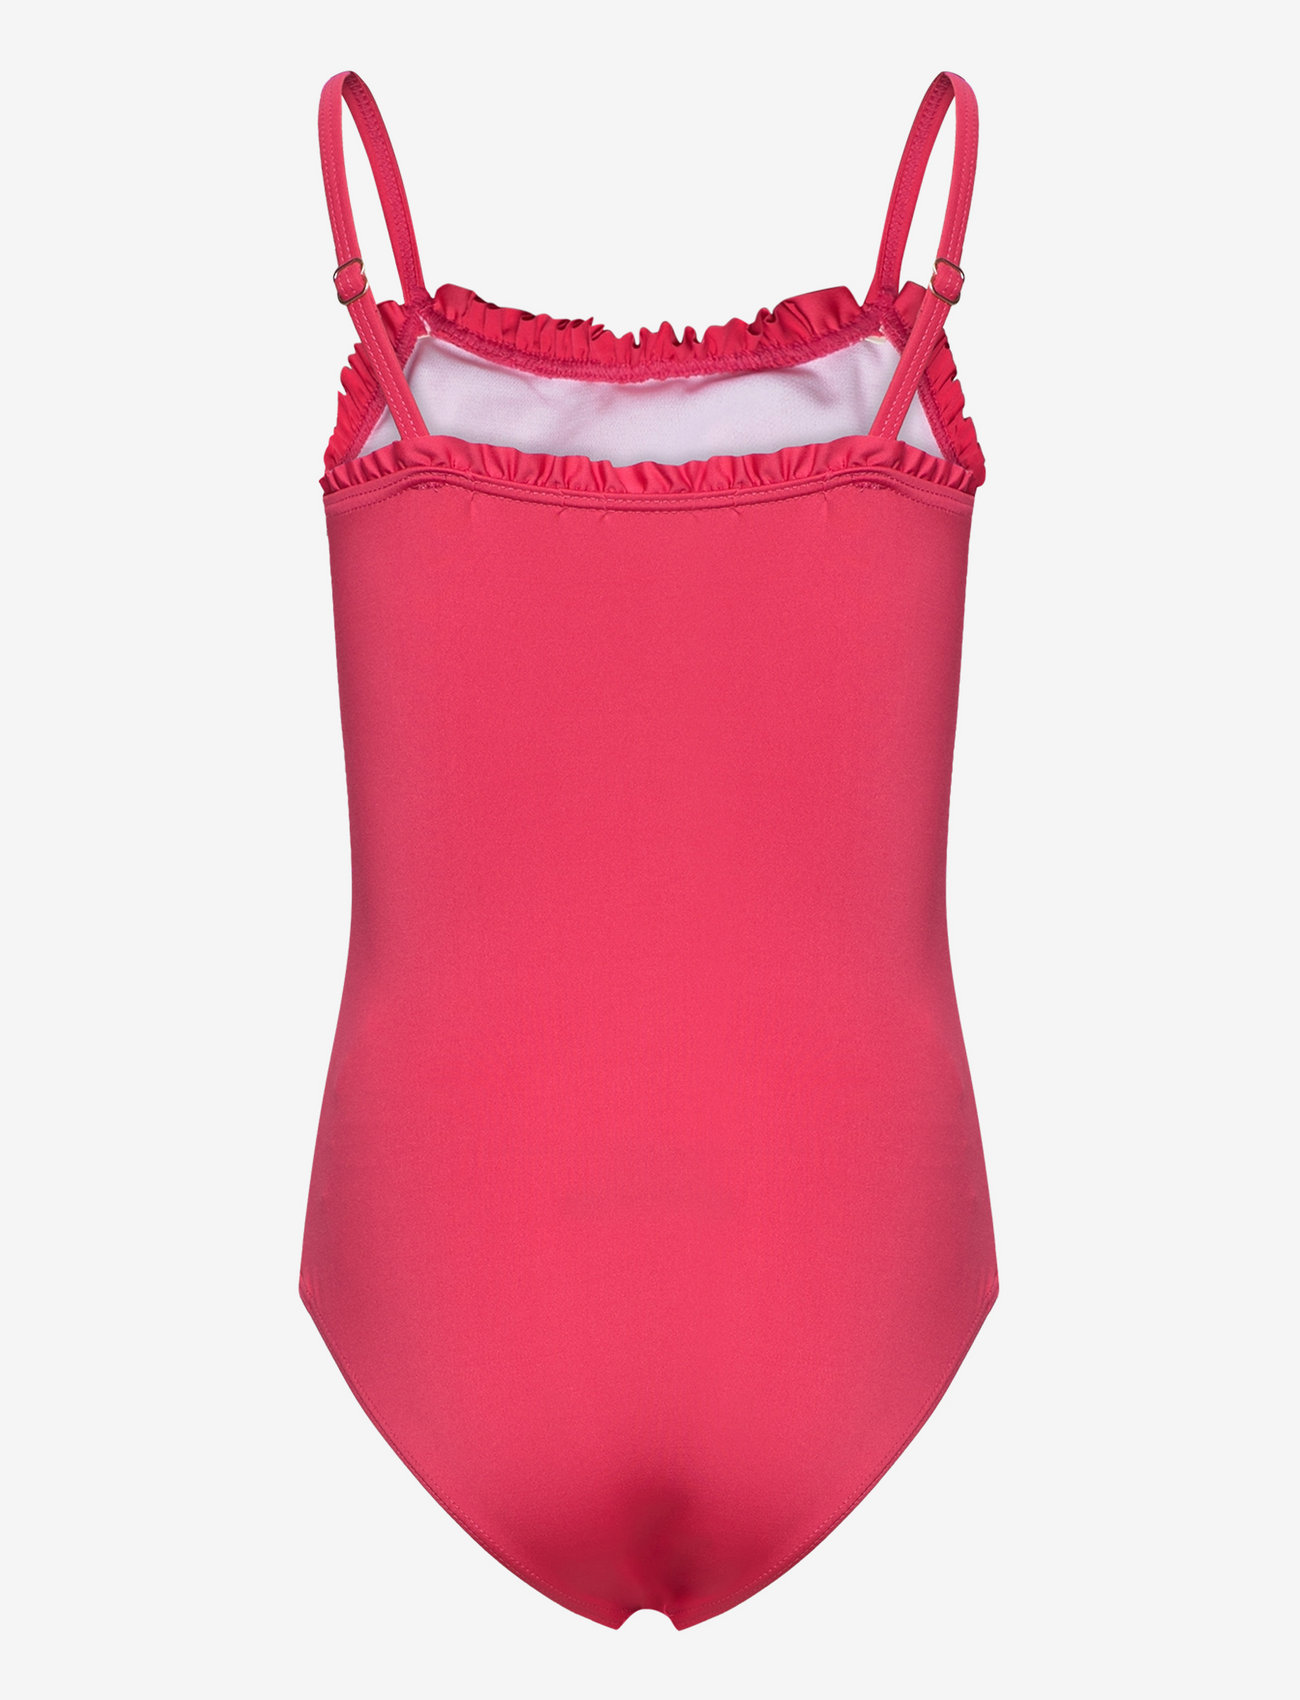 Sofie Schnoor Young - Swimsuit - summer savings - bright pink - 1